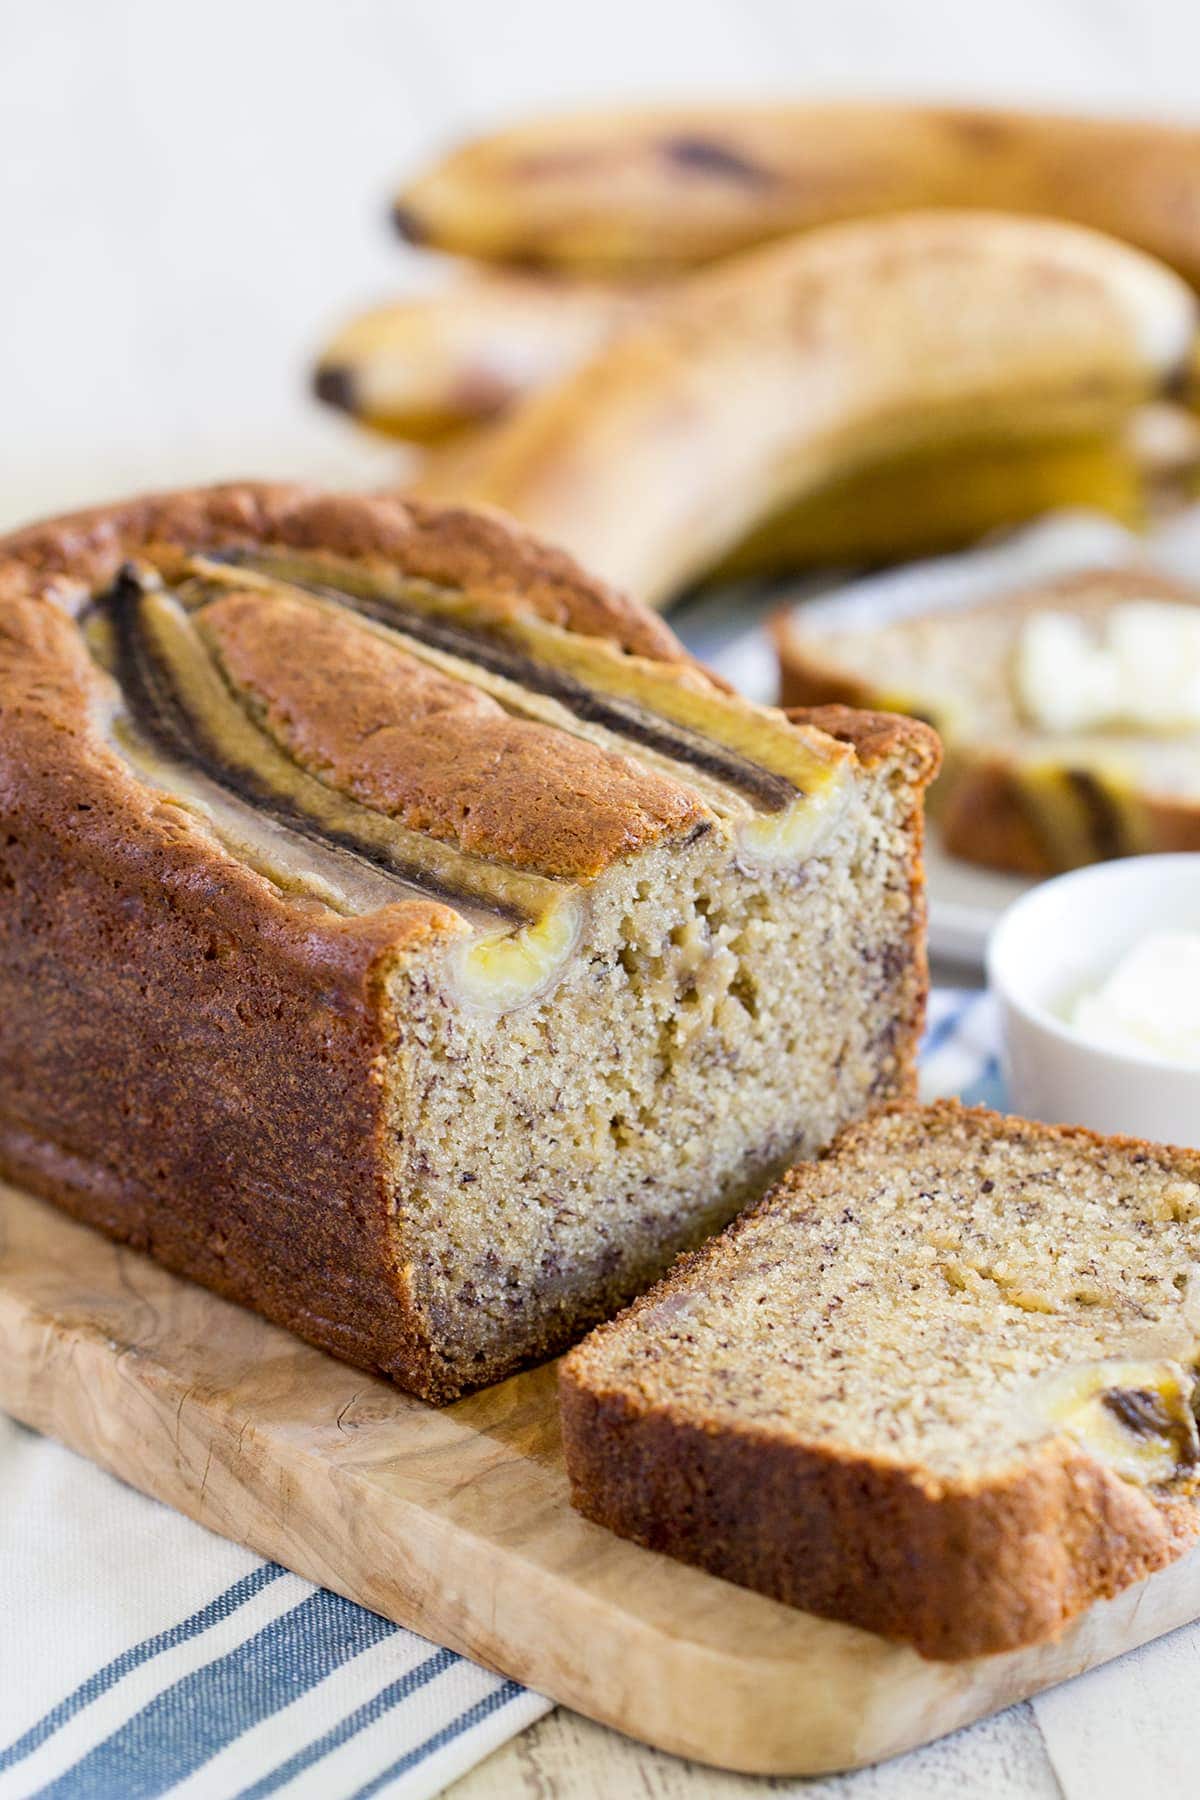 This recipe is for the very best sour cream banana bread that is very moist, flavorful and delicious! The pefect classic banana bread.